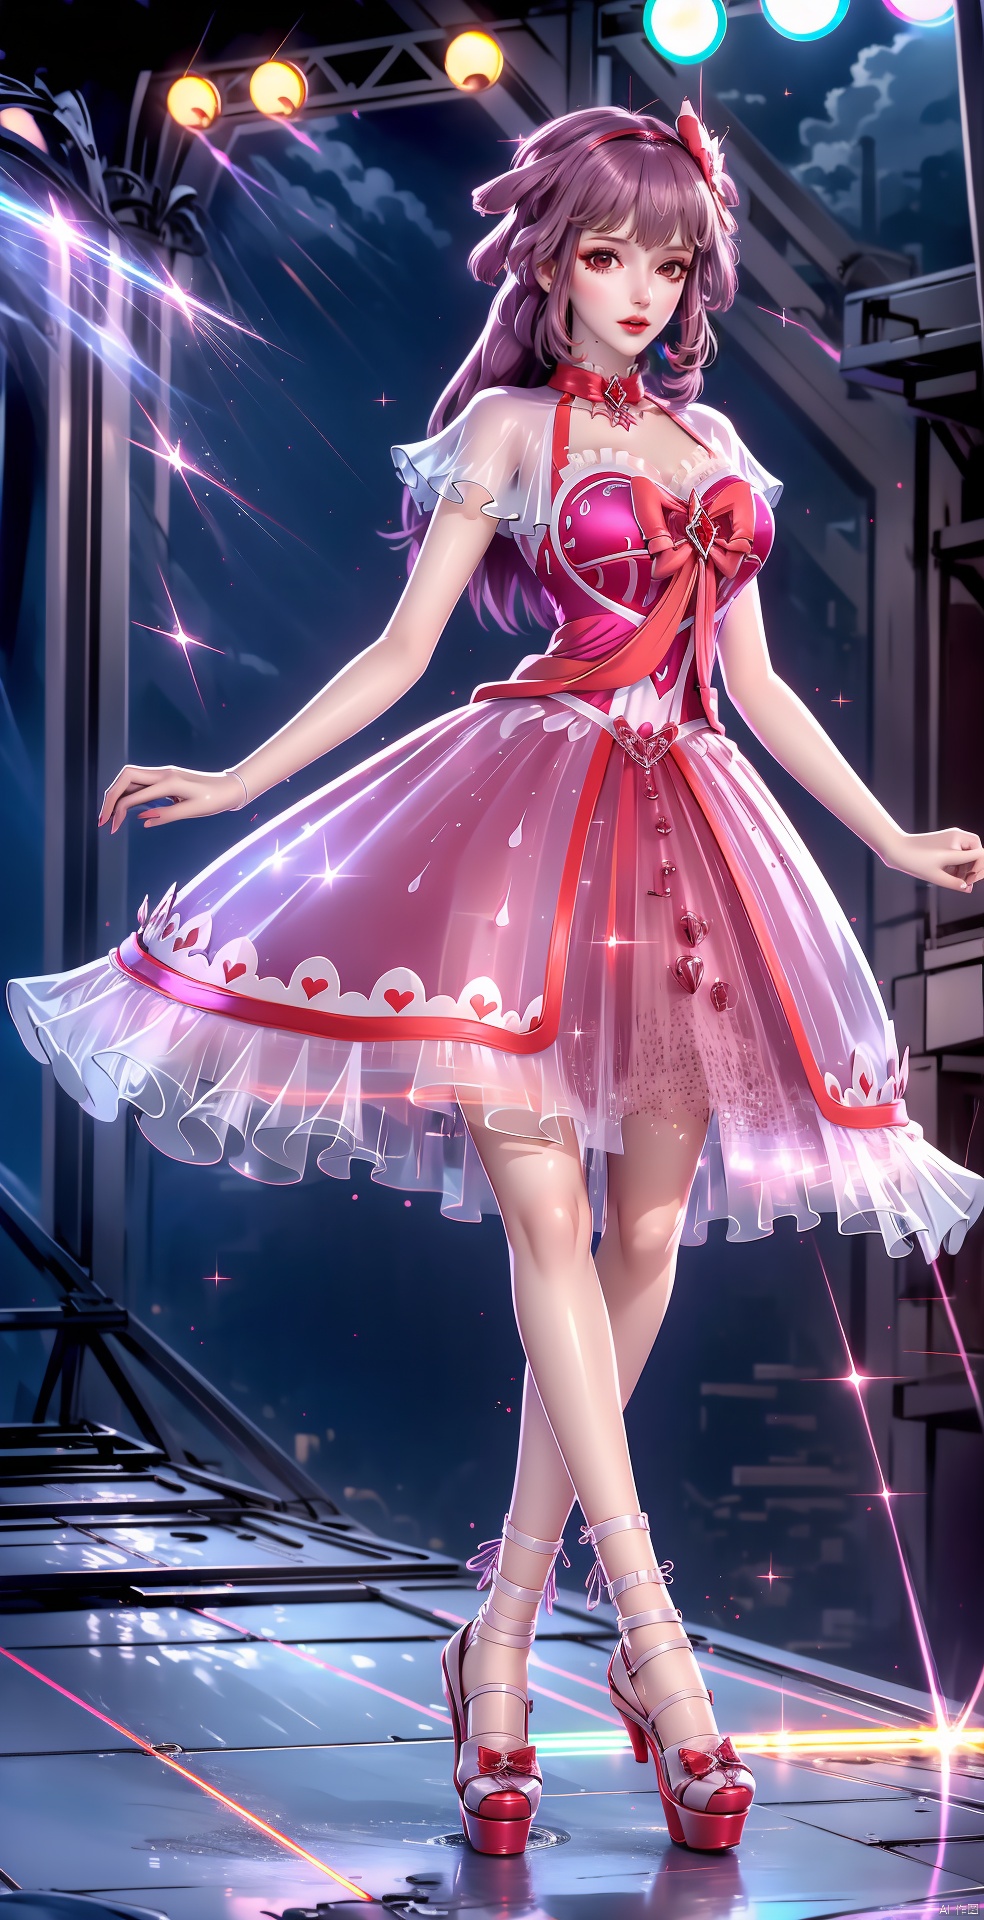  product girl, catwalk (modeling), stage, show, long legs, looking at the audience, charming smile, short skirt, high heels,long hair, xuer hologram Laser dress